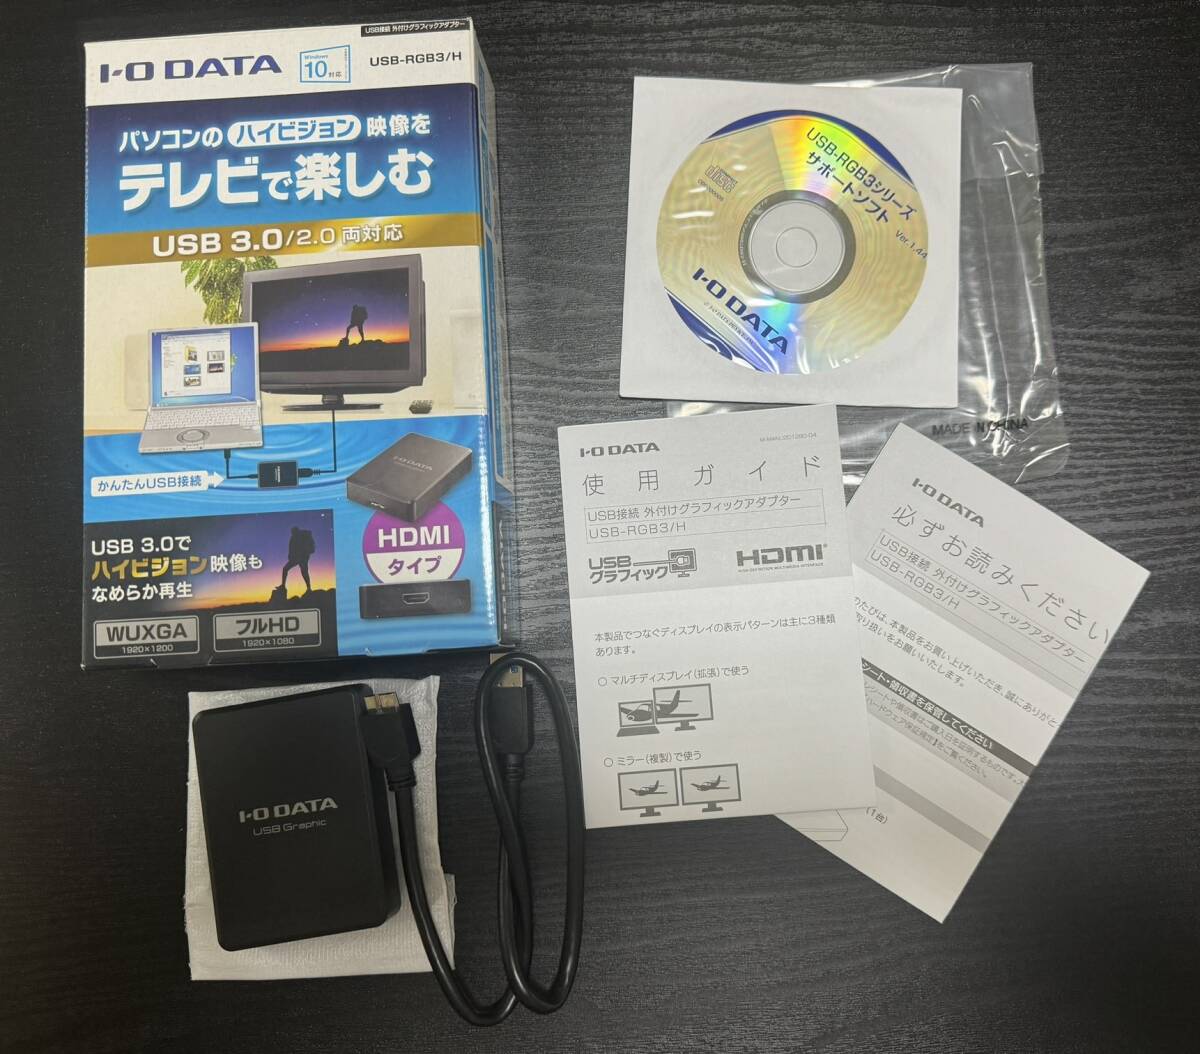  postage included * selling out! *I*O DATA USB-HDMI conversion connector [USB-RGB3/H] Hi-Vision image correspondence *